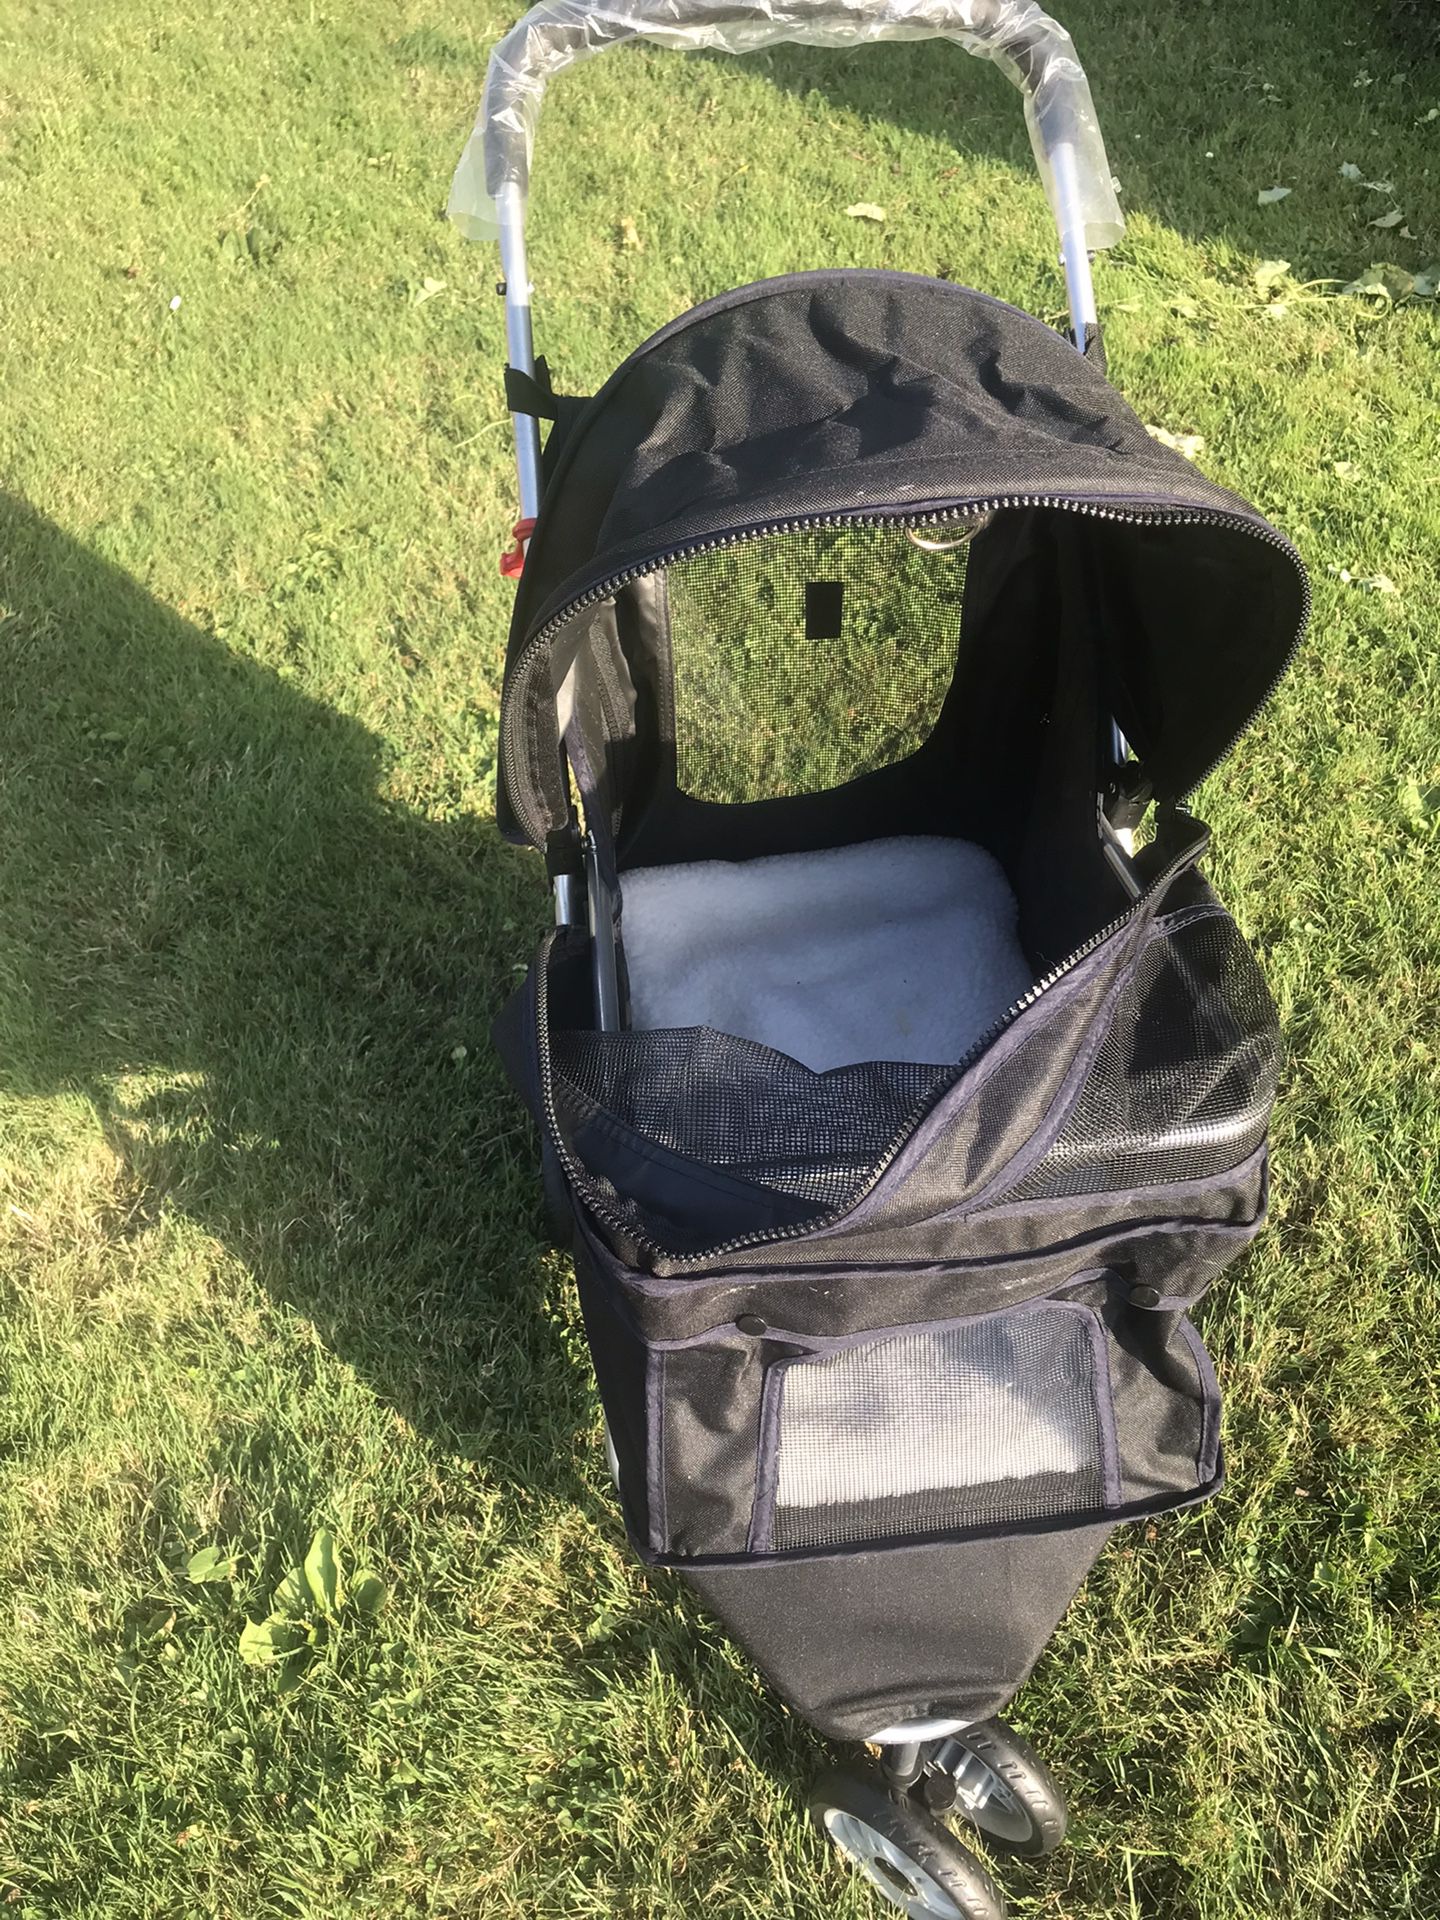 Dog/Cat/Pet Stroller Never Used And I No Longer Have Pets